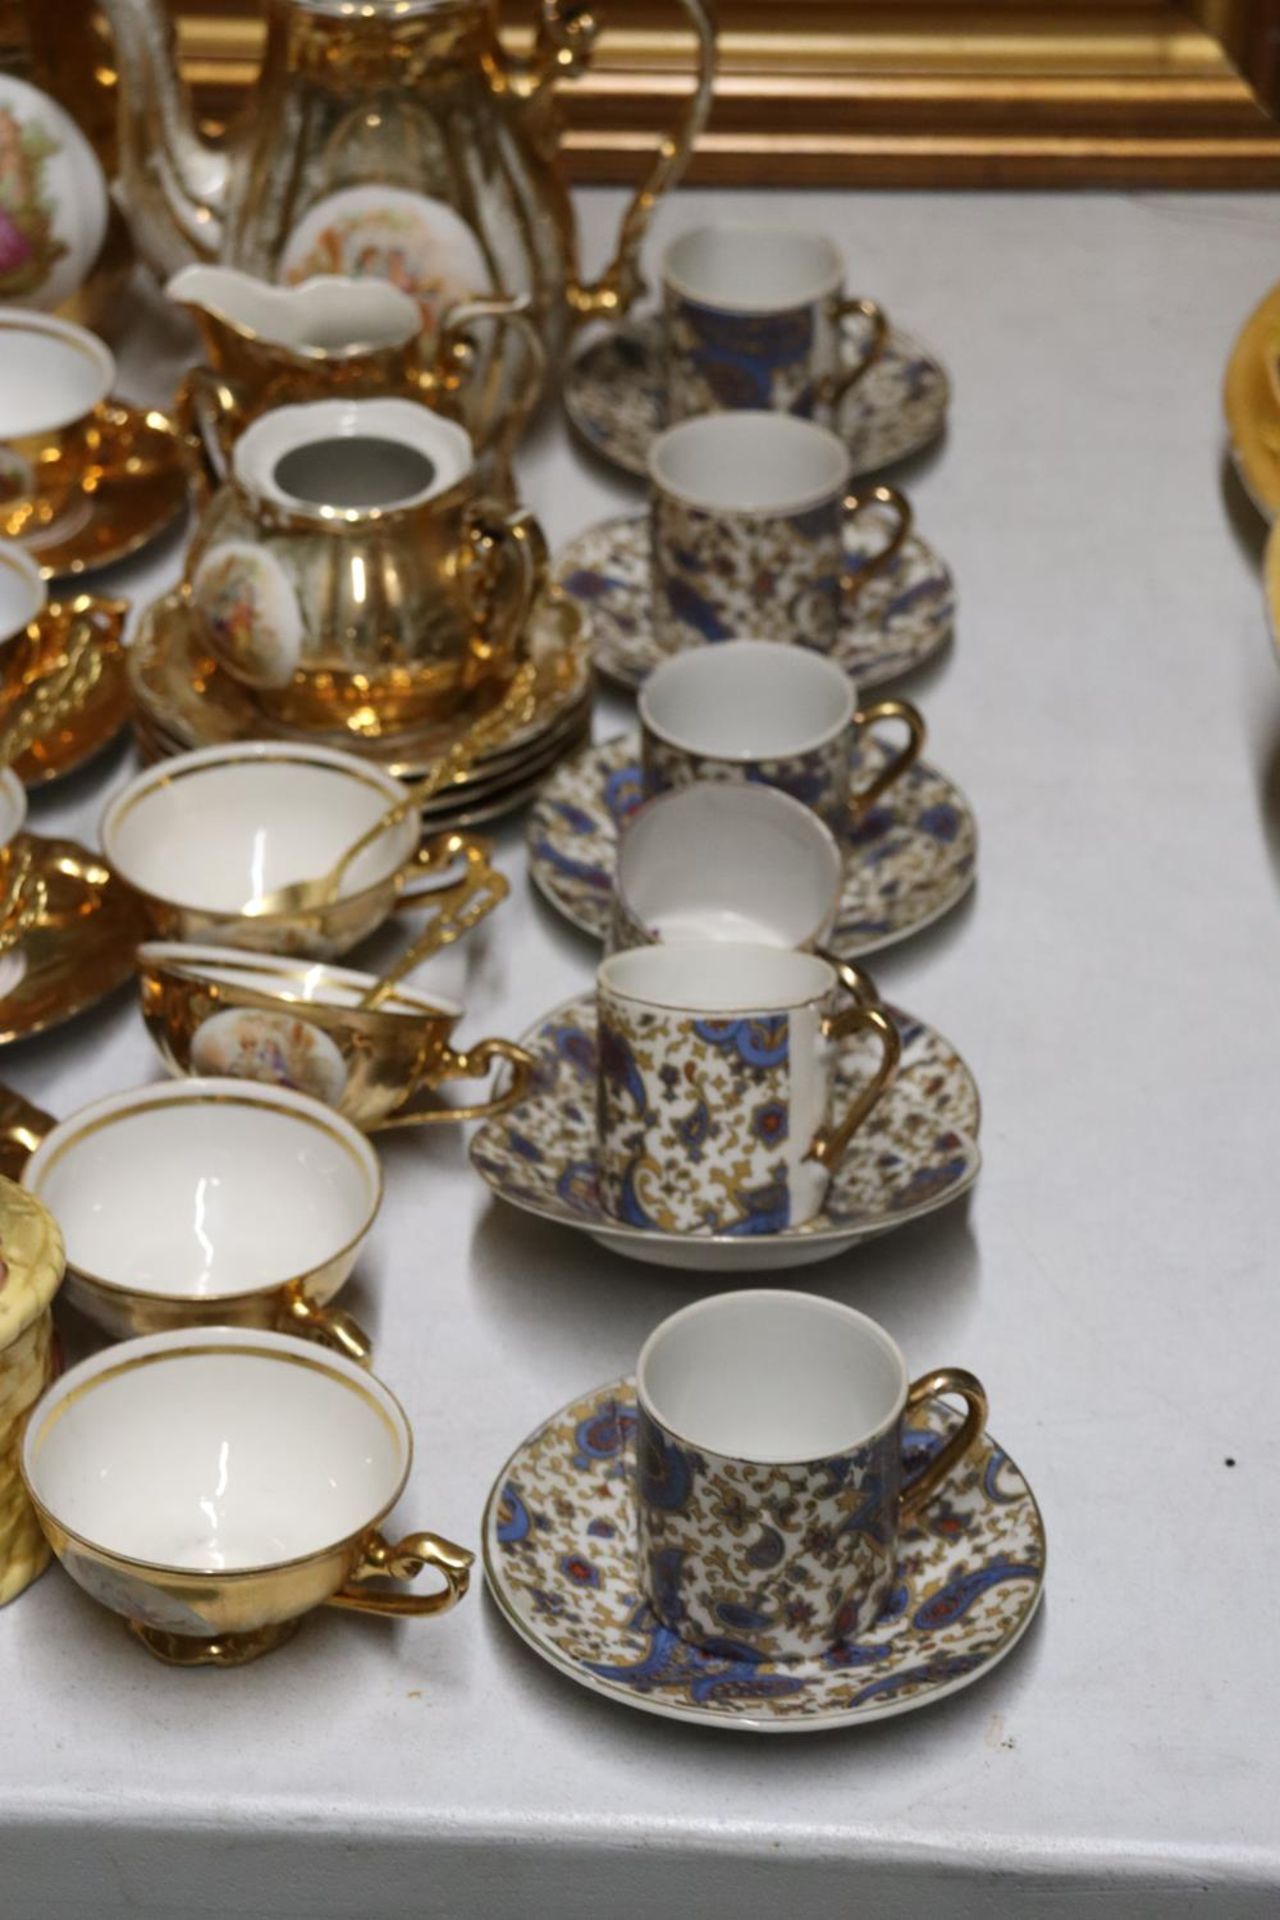 A QUANTITY OF VINTAGE TEAWARE TO INCLUDE GERMAN GILT WITH A CLASSICAL DESIGN, COFFEE POTS, SUGAR - Image 5 of 6